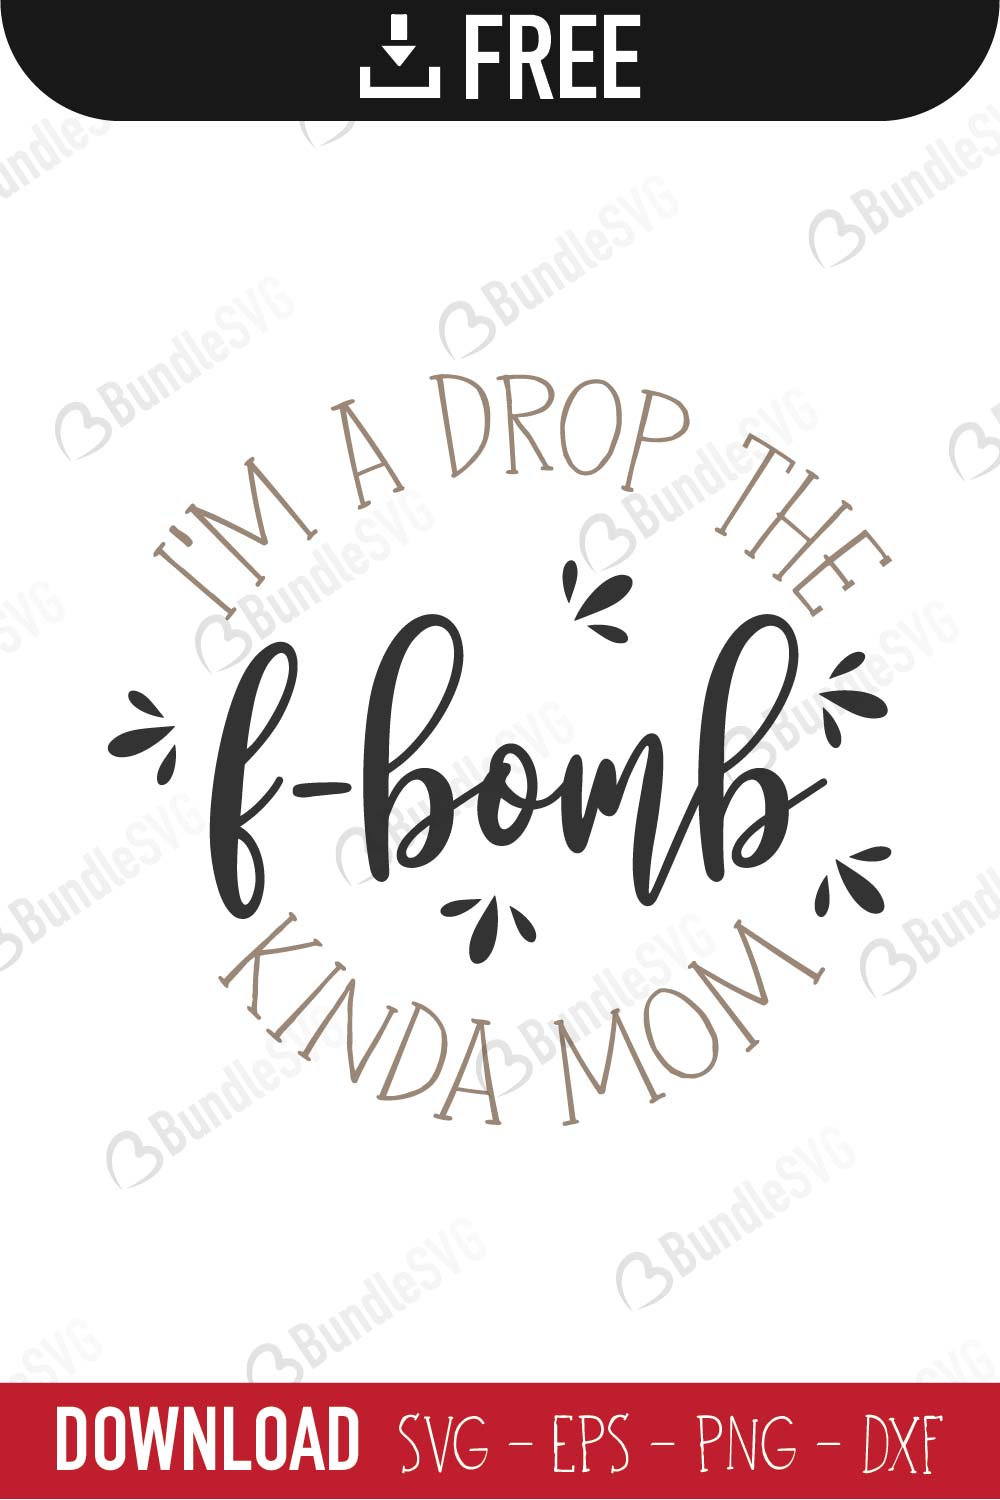 Free Free 76 F Bomb Mom With Tattoos Svg Free SVG PNG EPS DXF File